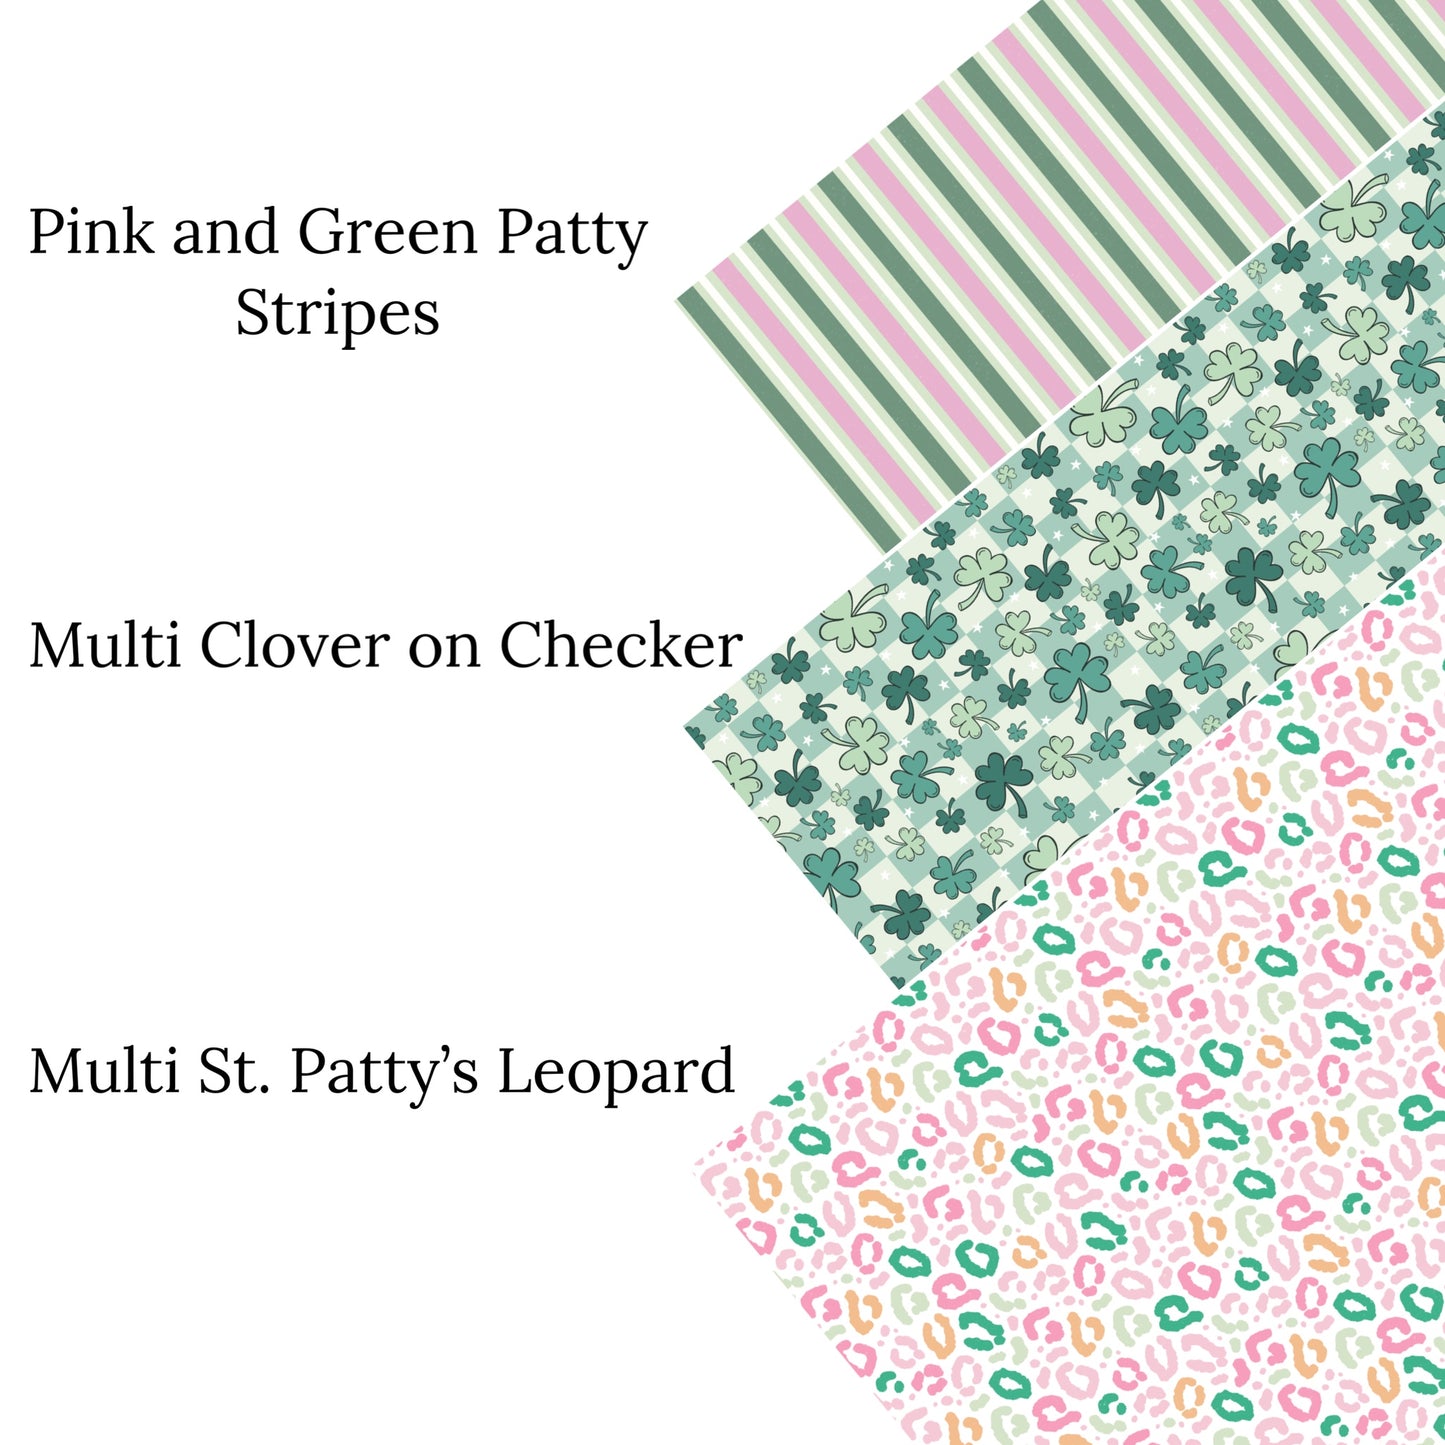 Multi Clover on Checker Faux Leather Sheets